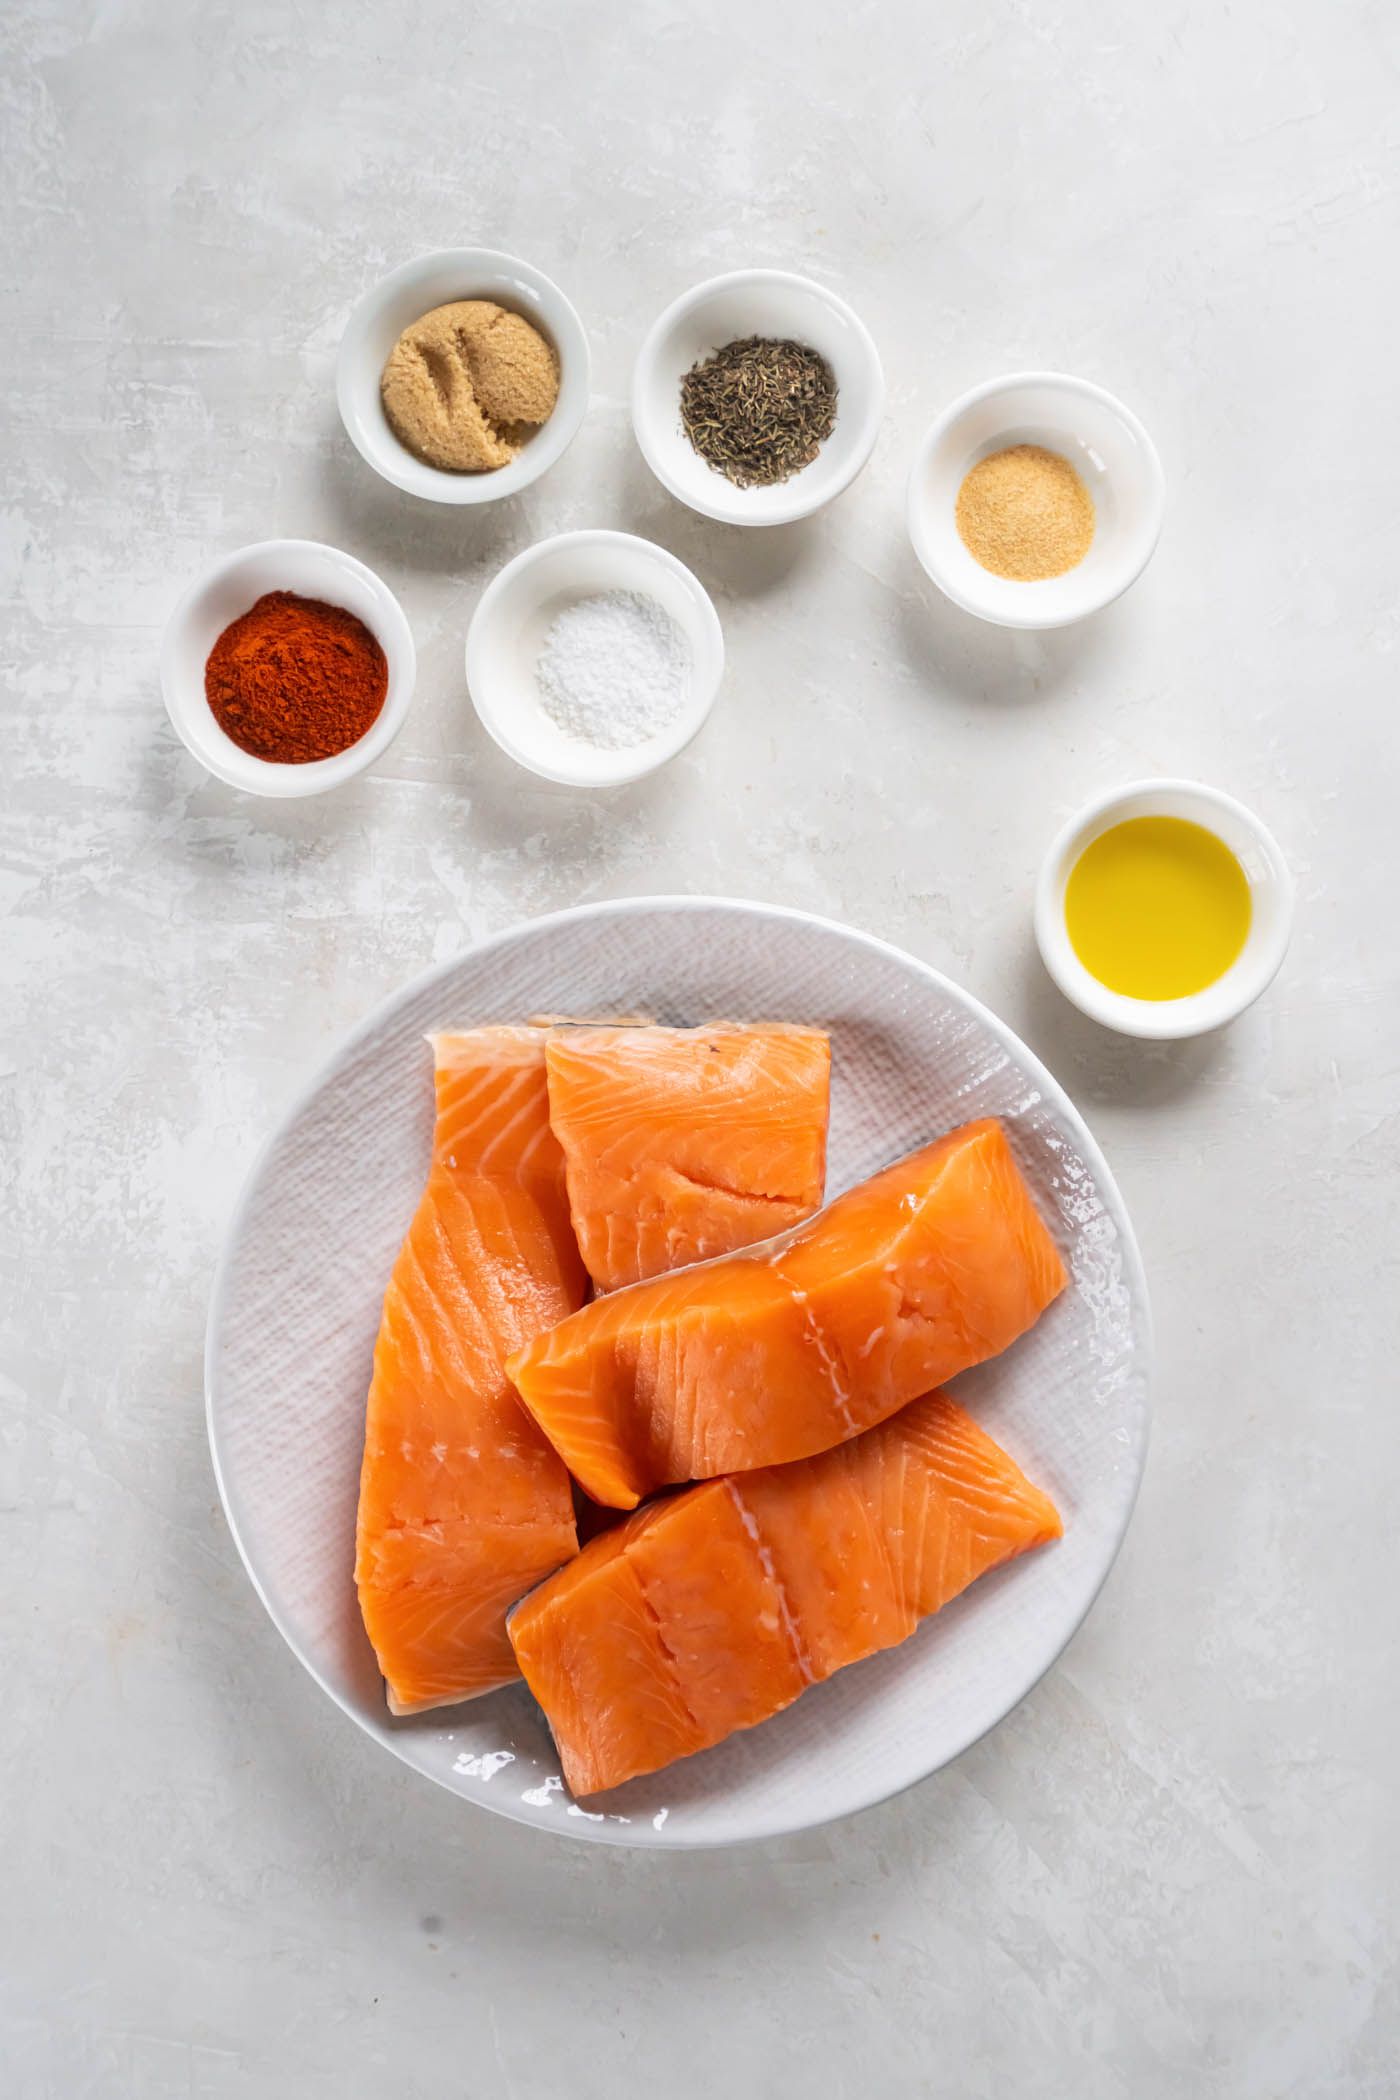 Ingredients for grilled salmon recipe.